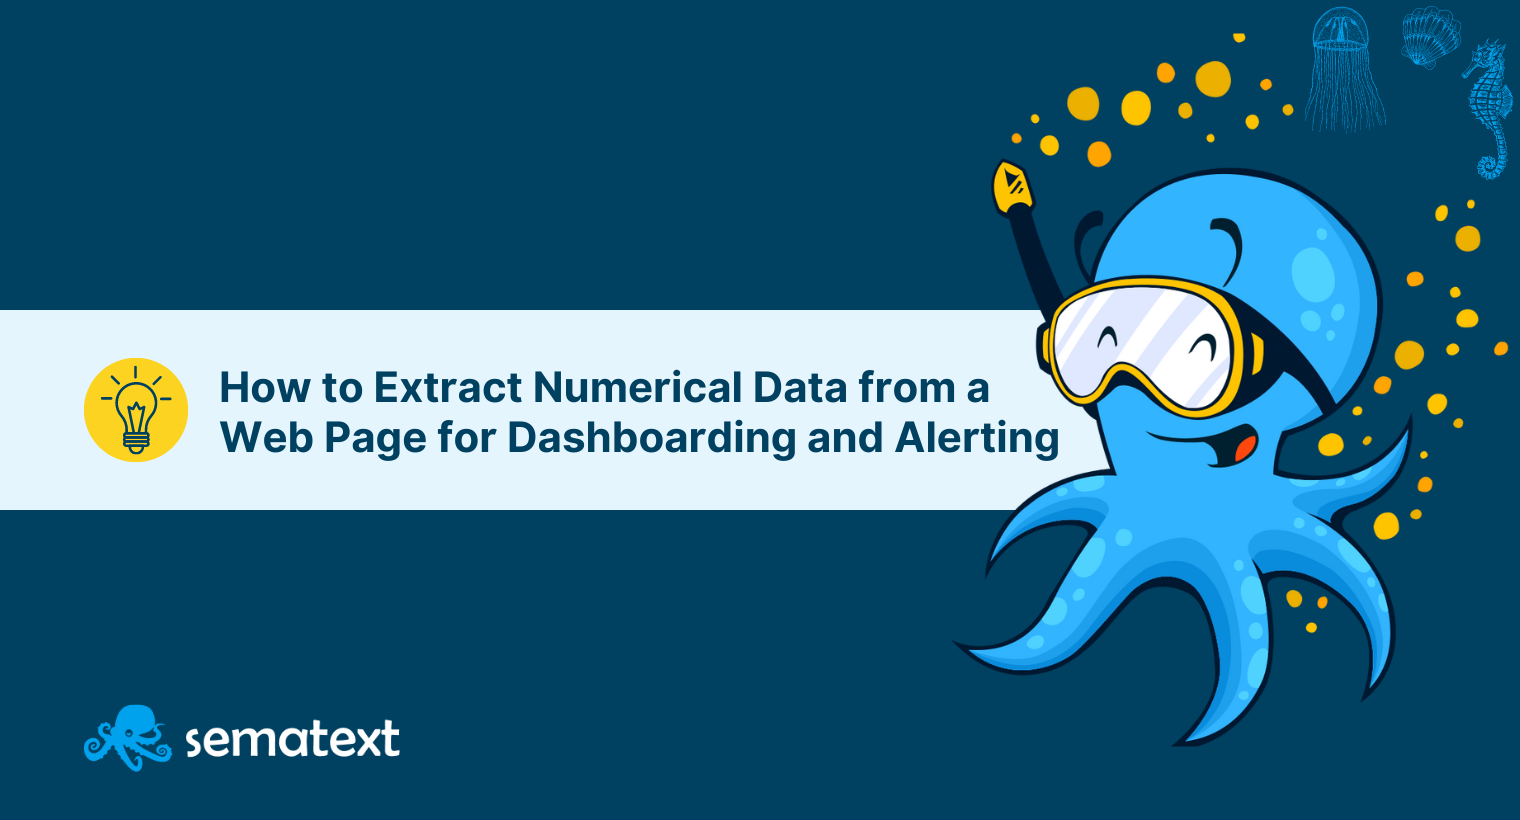 How to Extract Numerical Data from a Web Page for Dashboarding and Alerting